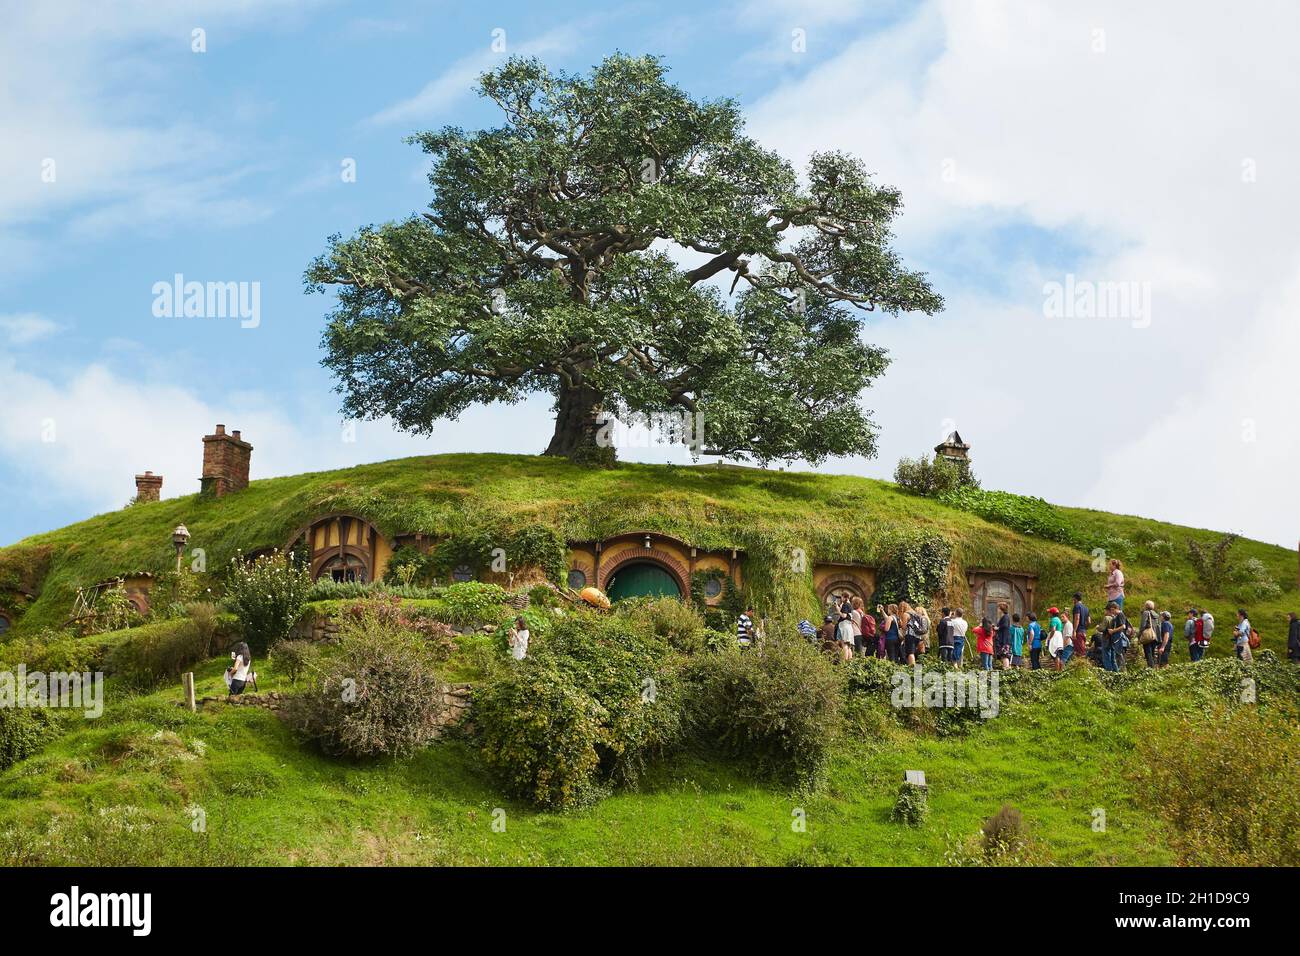 MATAMATA, NEW ZEALAND - CIRCA 2016: Movie set for the Lord of The Rings and The Hobbit. Bilbo Baggins house with the notable tall oak tree above it. G Stock Photo